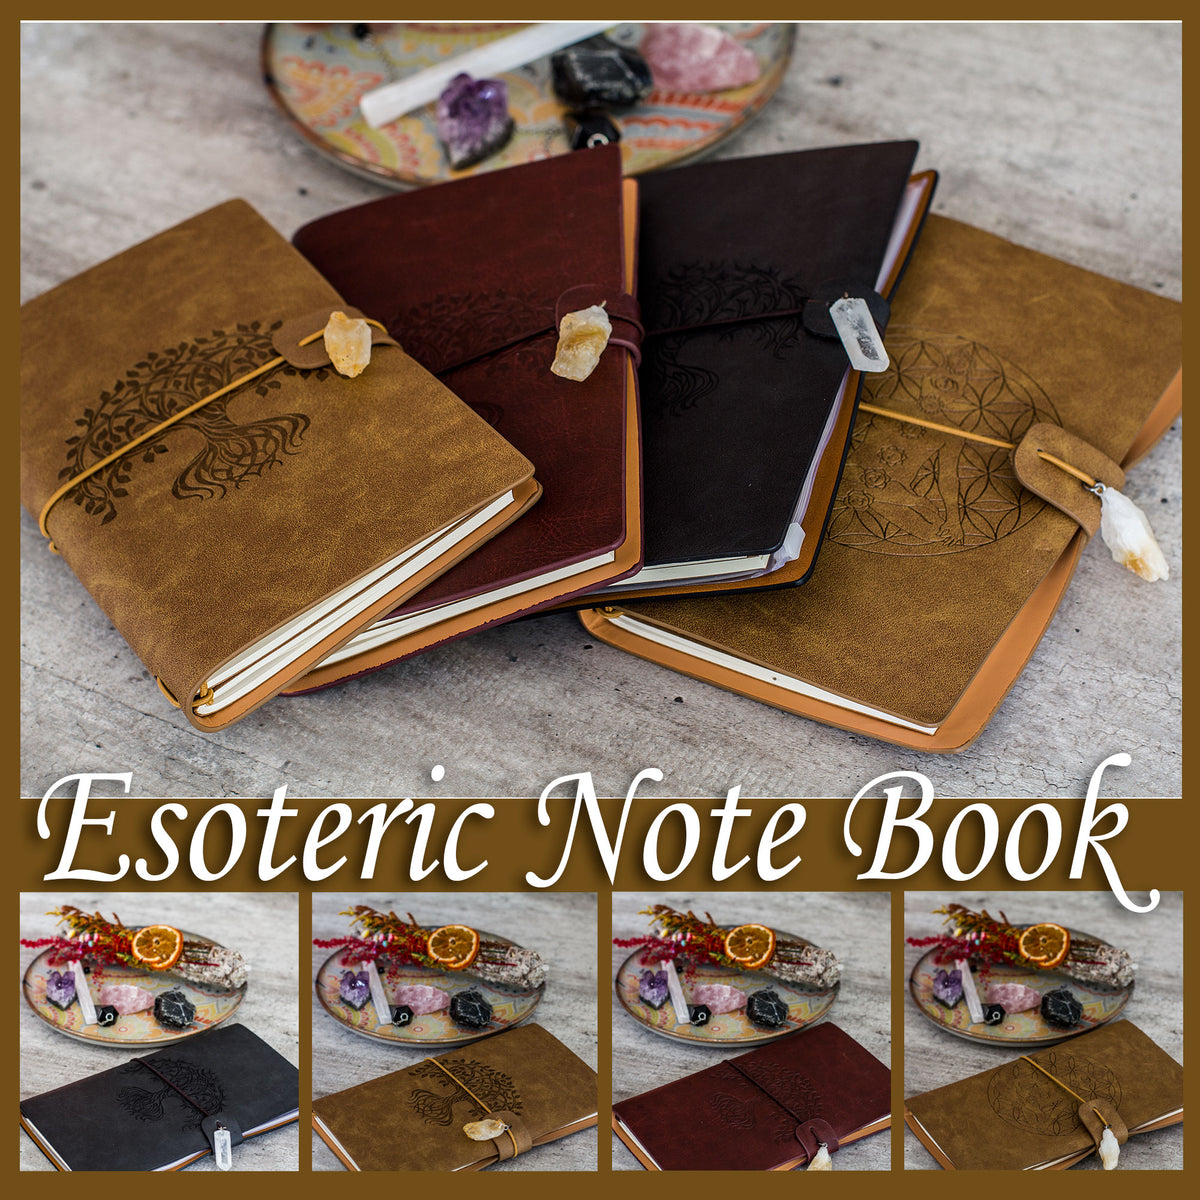 Manifestation Journal - Tree of Life (Brown Leather) - Capture your thoughts and ambitions in this elegant leather journal complete with an elastic band and a hanging crystal to manifest your ideal life.